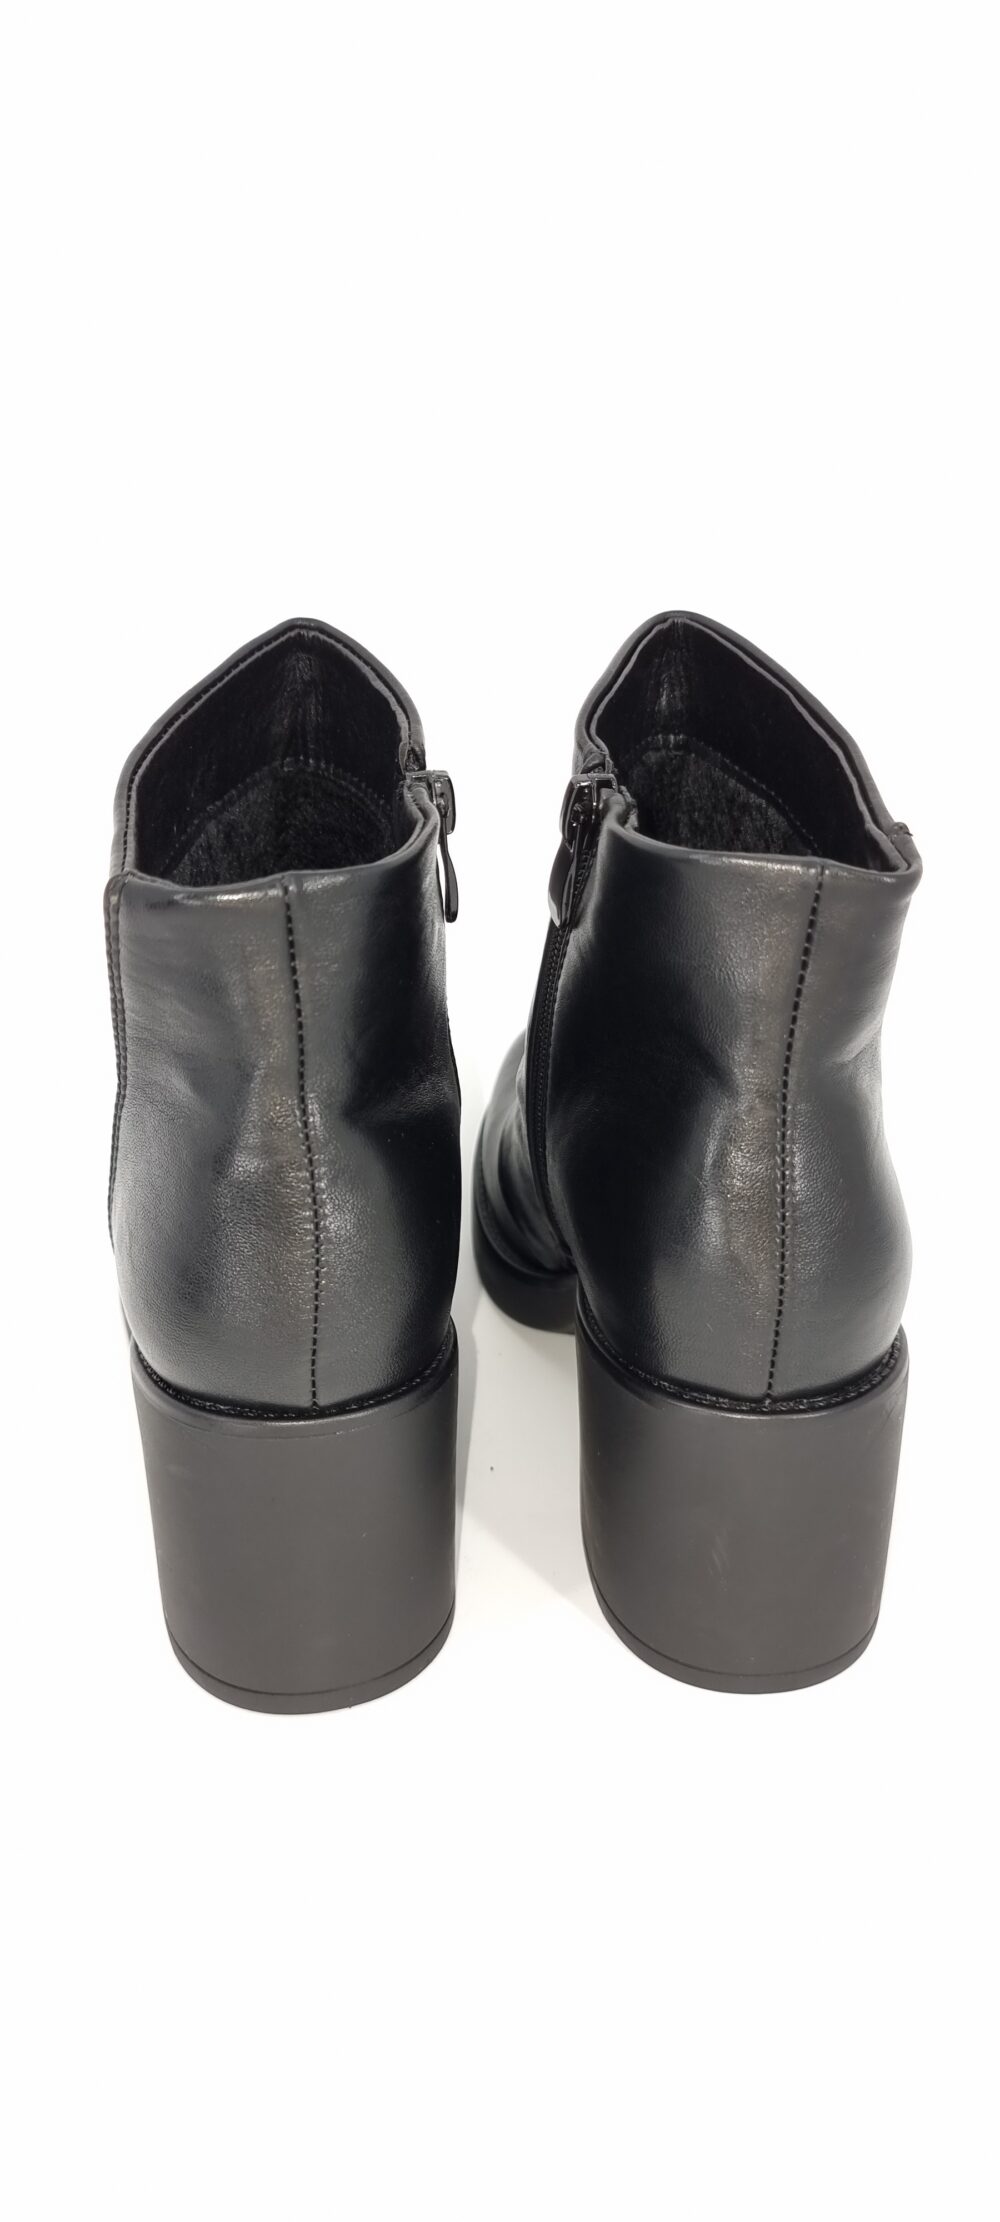 Round toe boot and low thick heel black